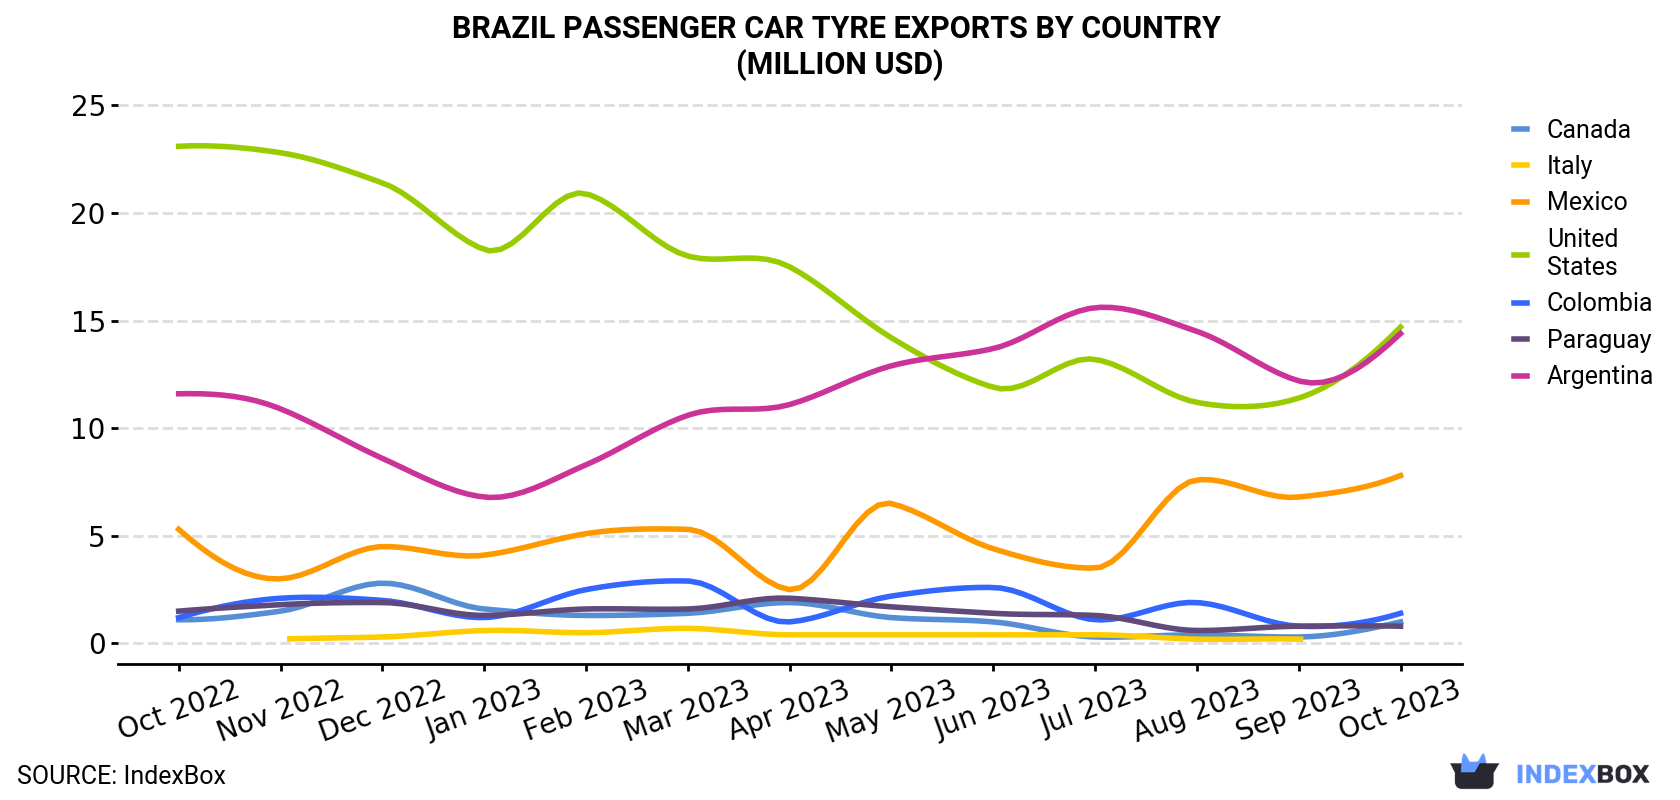 Brazil Passenger Car Tyre Exports By Country (Million USD)